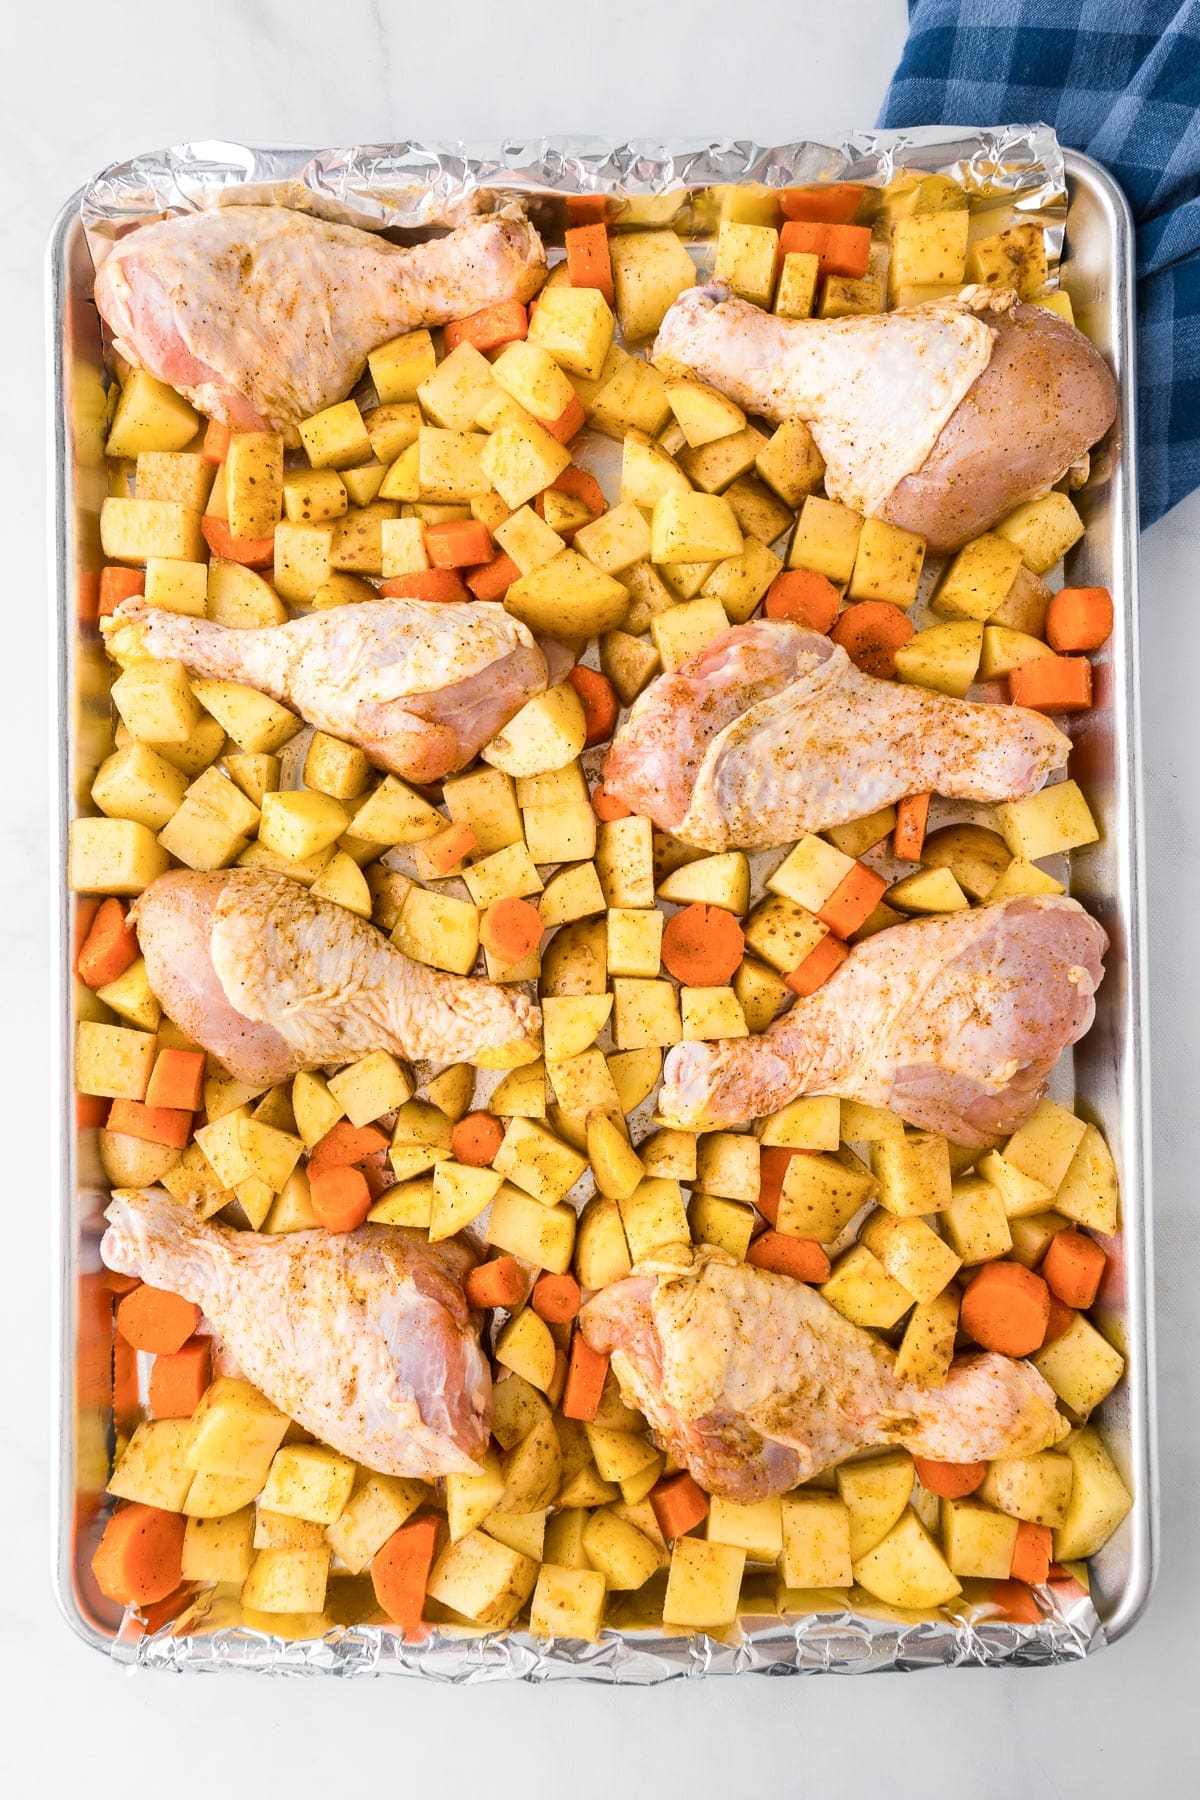 Raw chicken legs and diced vegetables seasoned and arranged in a baking tray, ready for cooking.